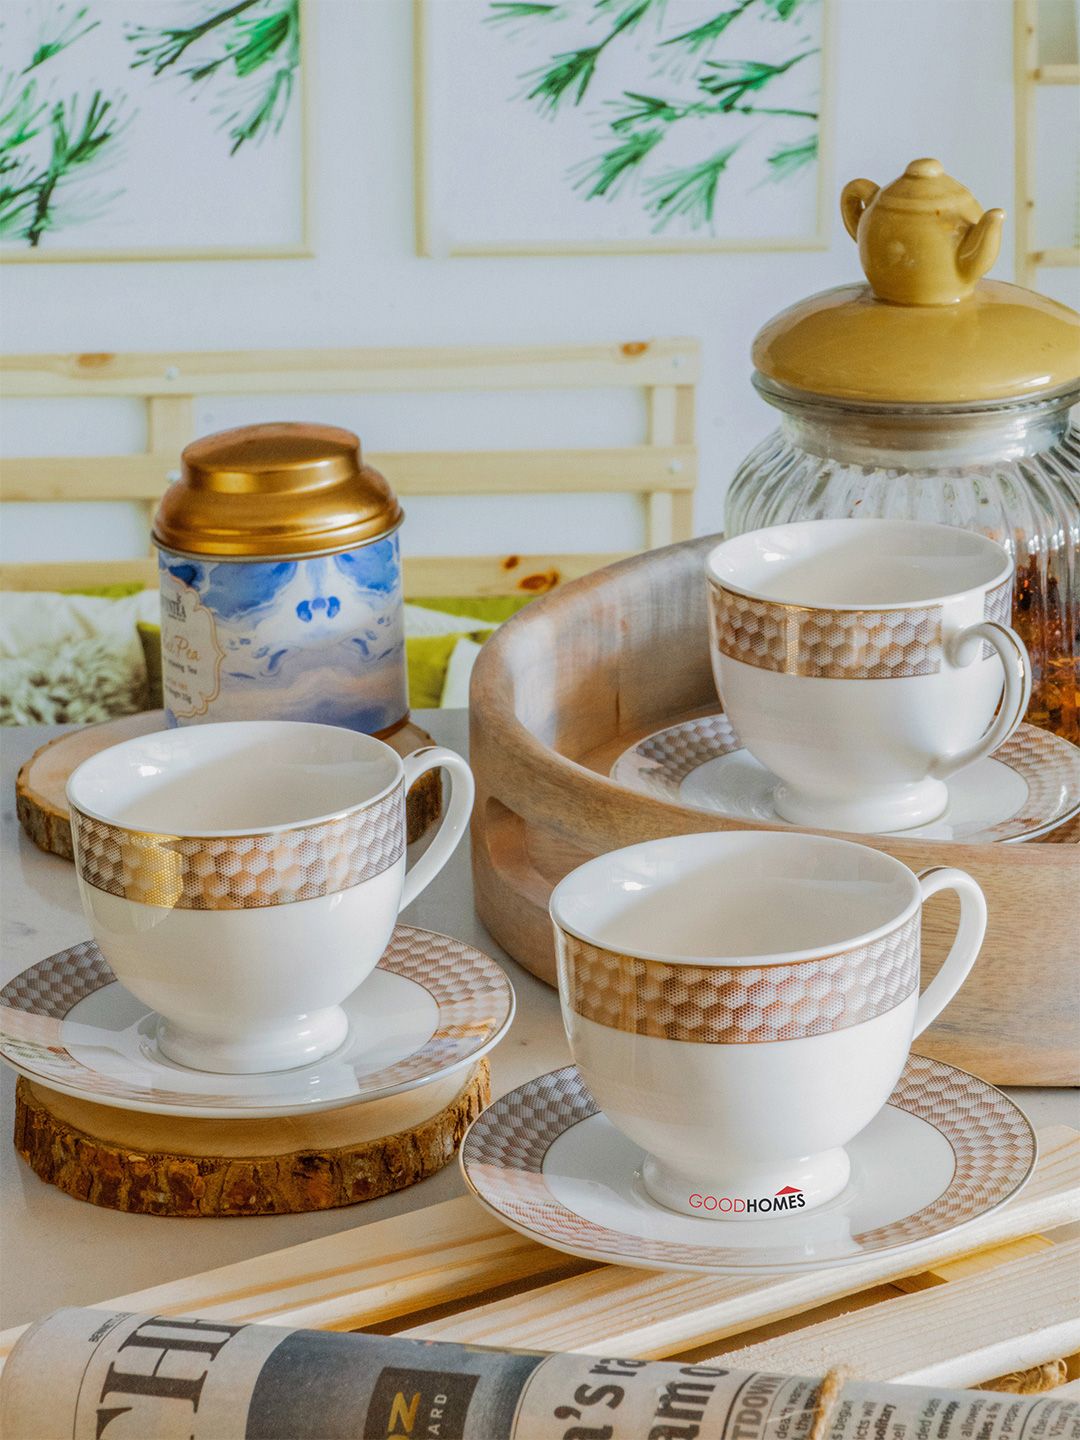 GOODHOMES White & Gold-Toned Set of 6 Printed Porcelain Glossy Cup Saucer Set Price in India